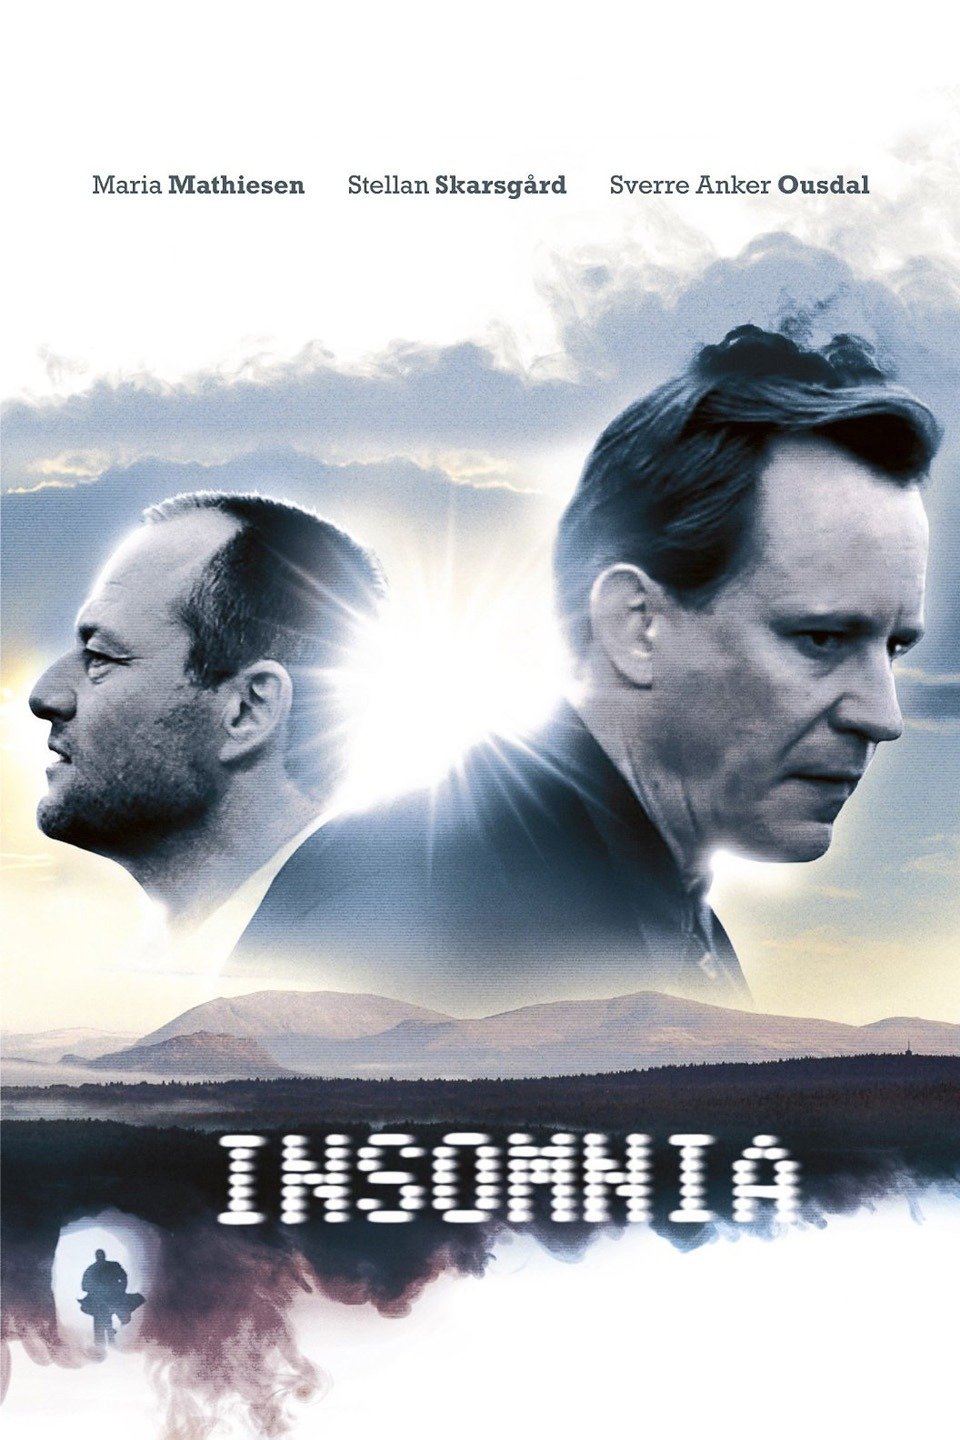 insomnia movie review rotten tomatoes